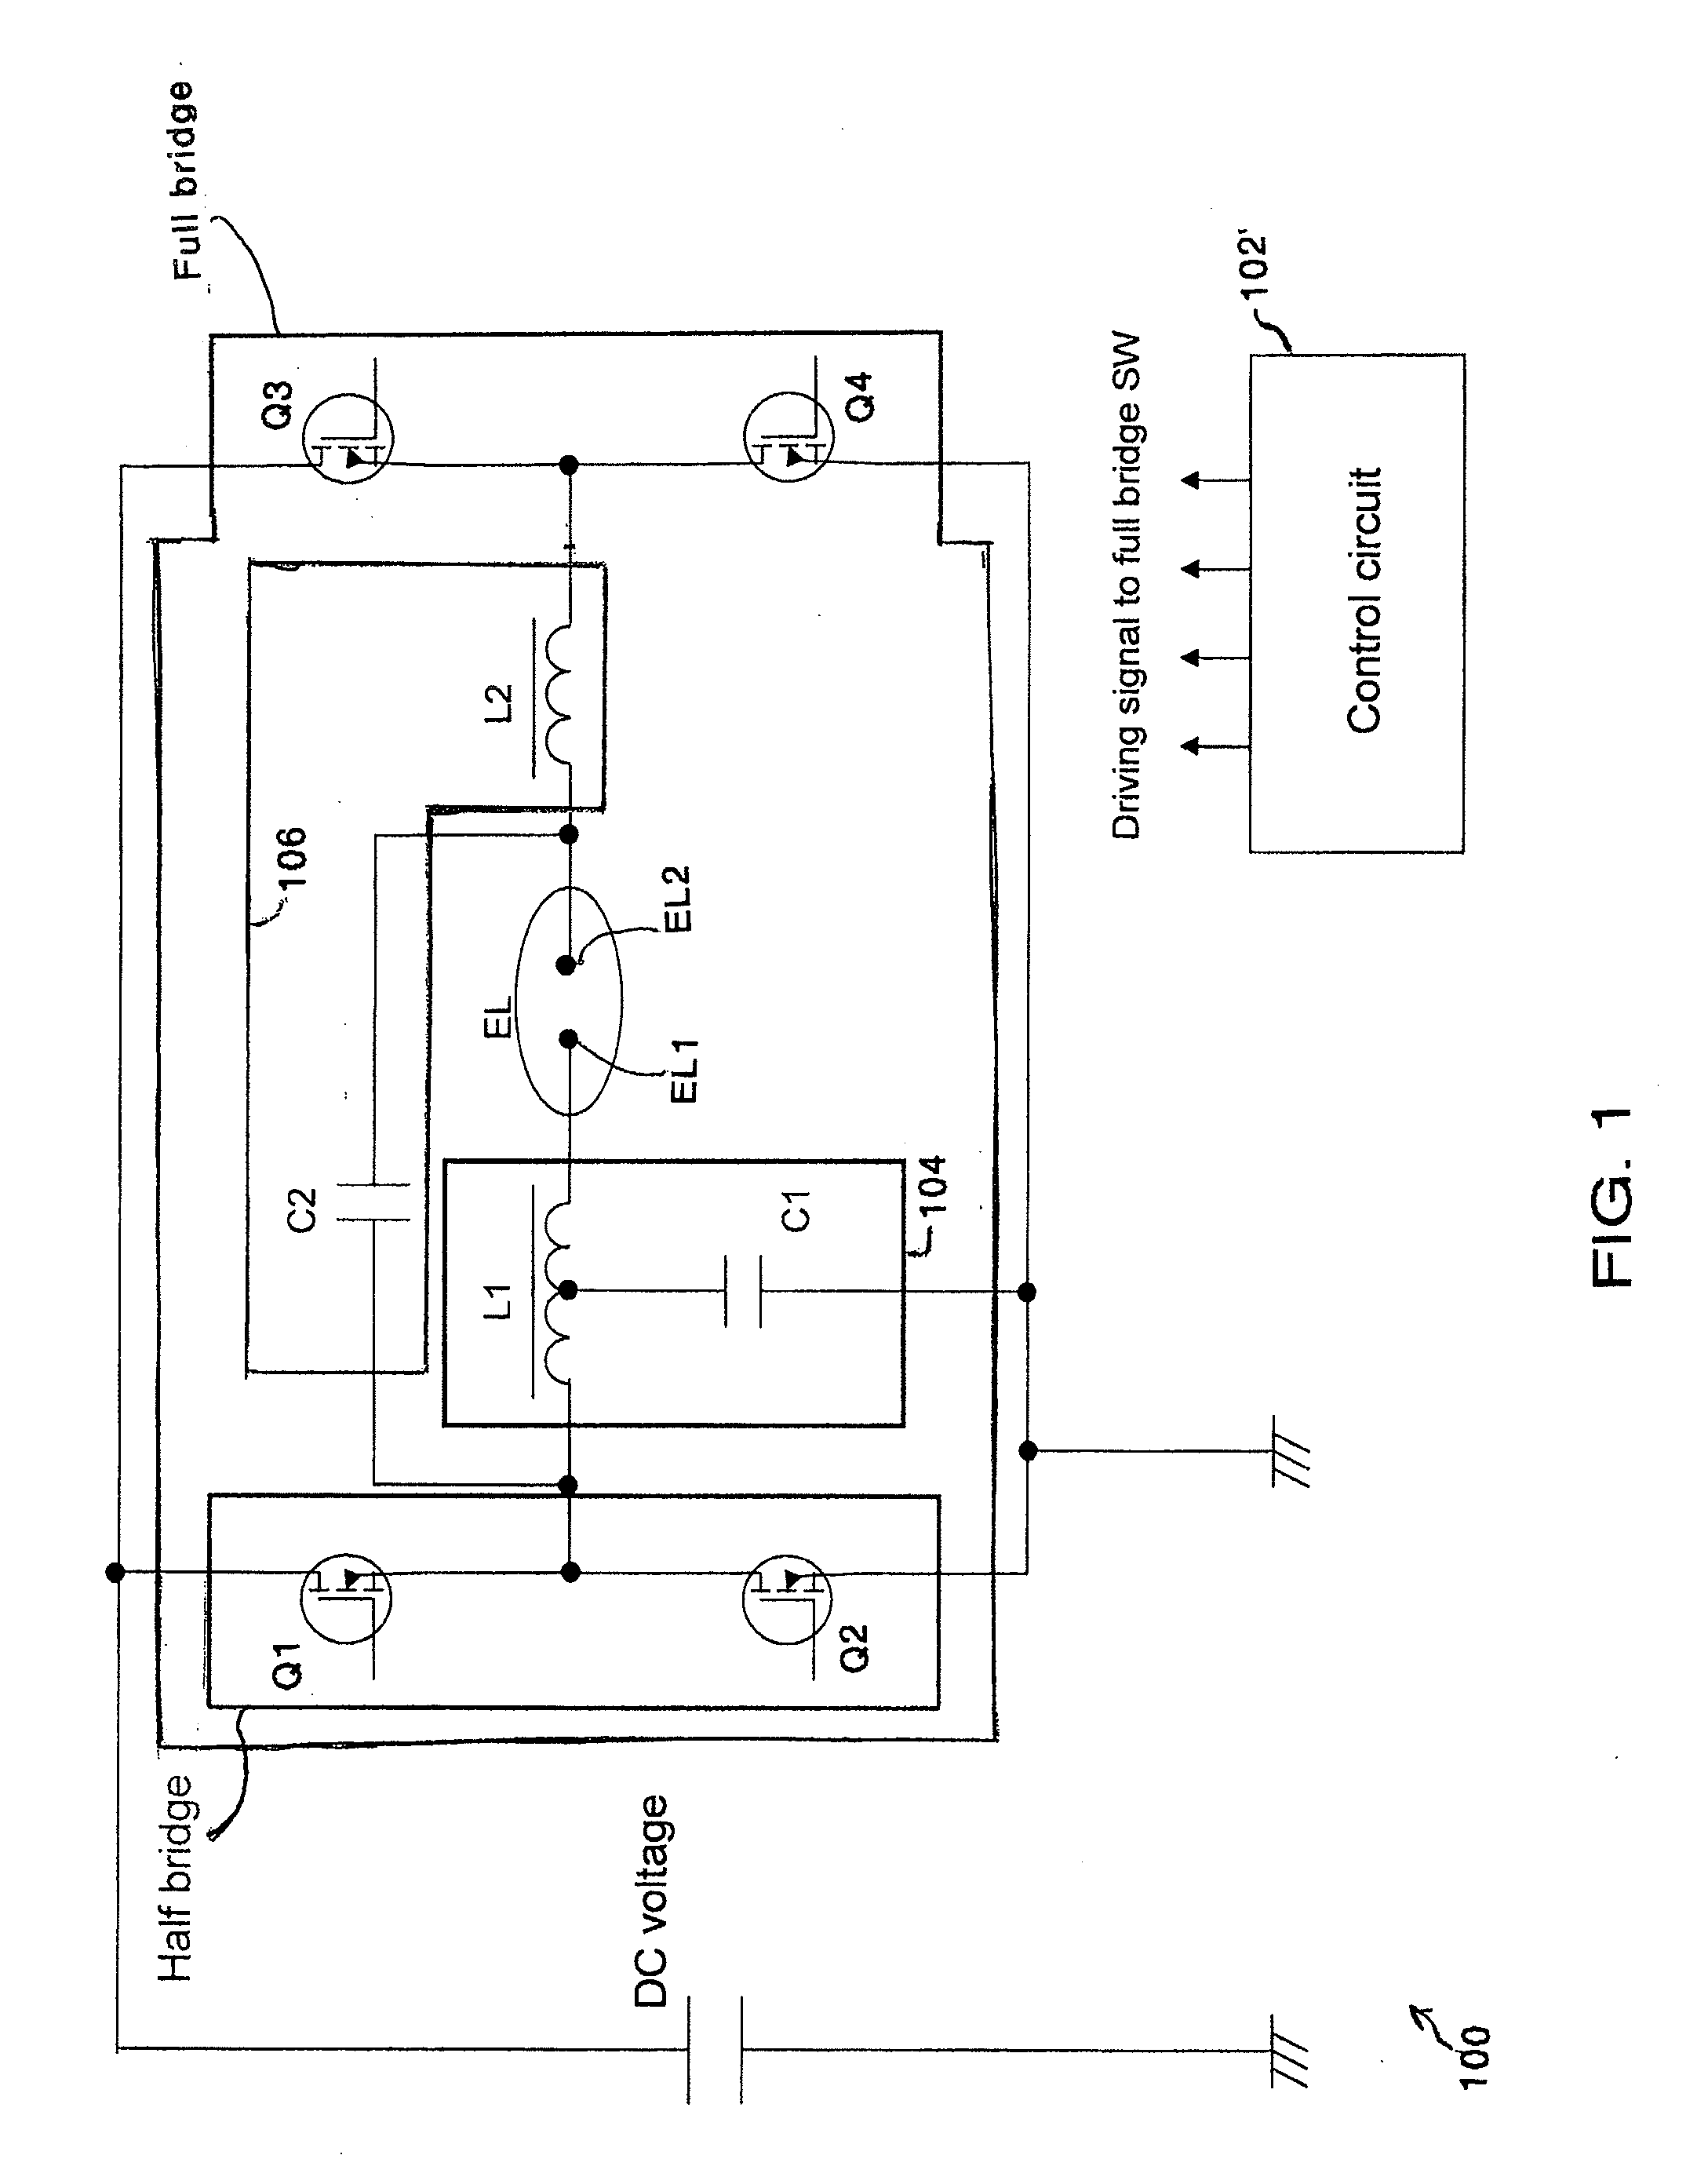 Circuit arrangement for operating a discharge lamp